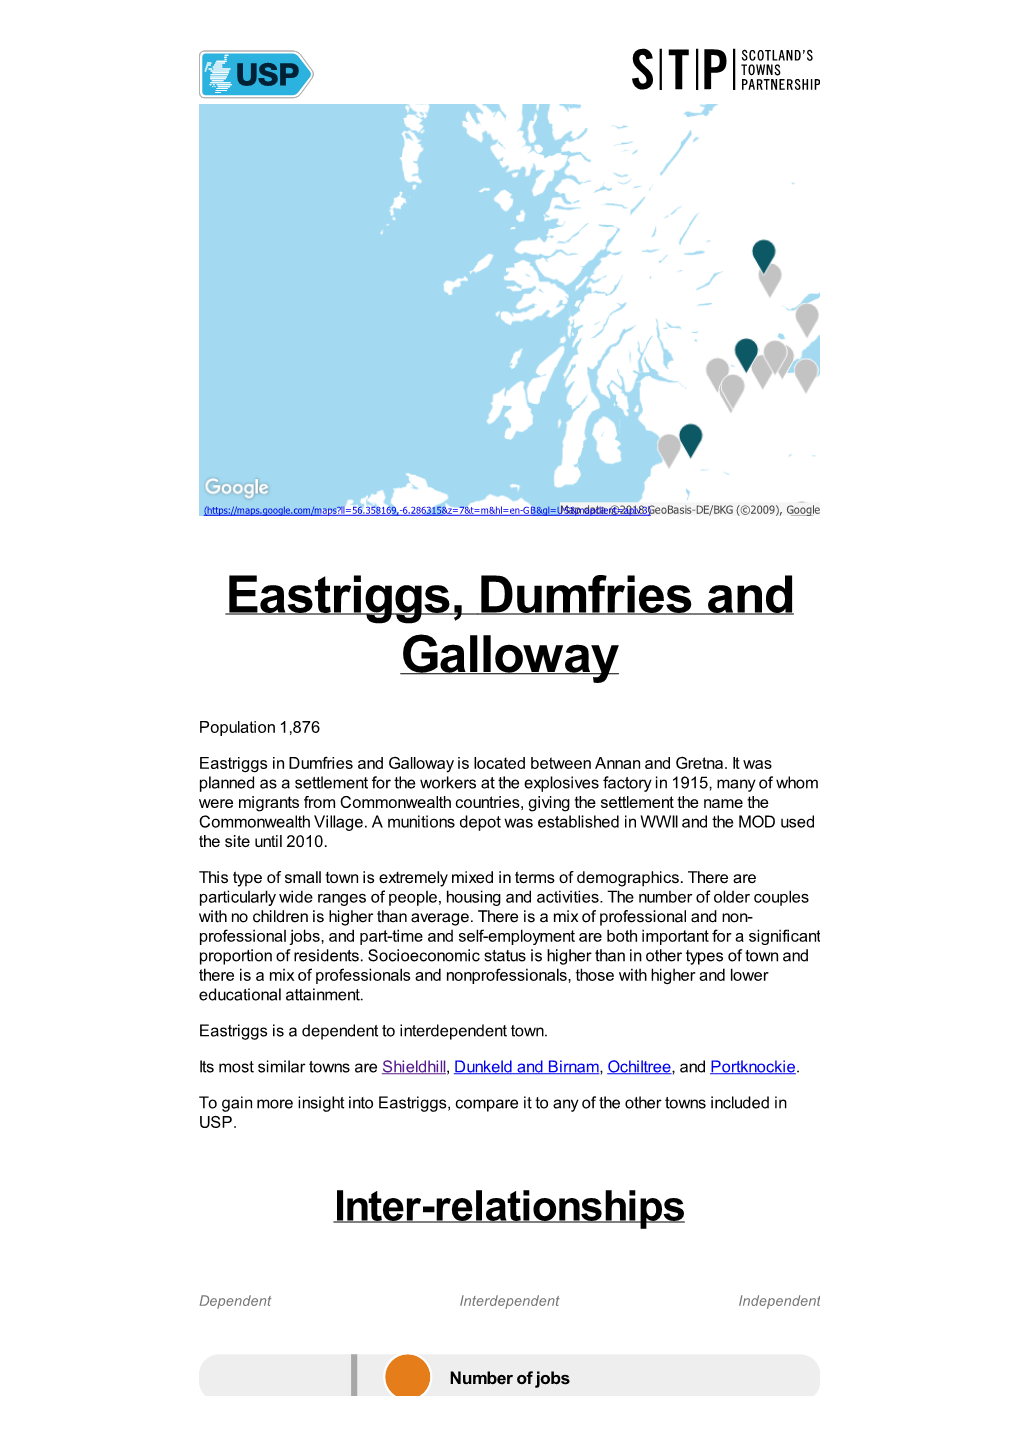 Eastriggs, Dumfries and Galloway